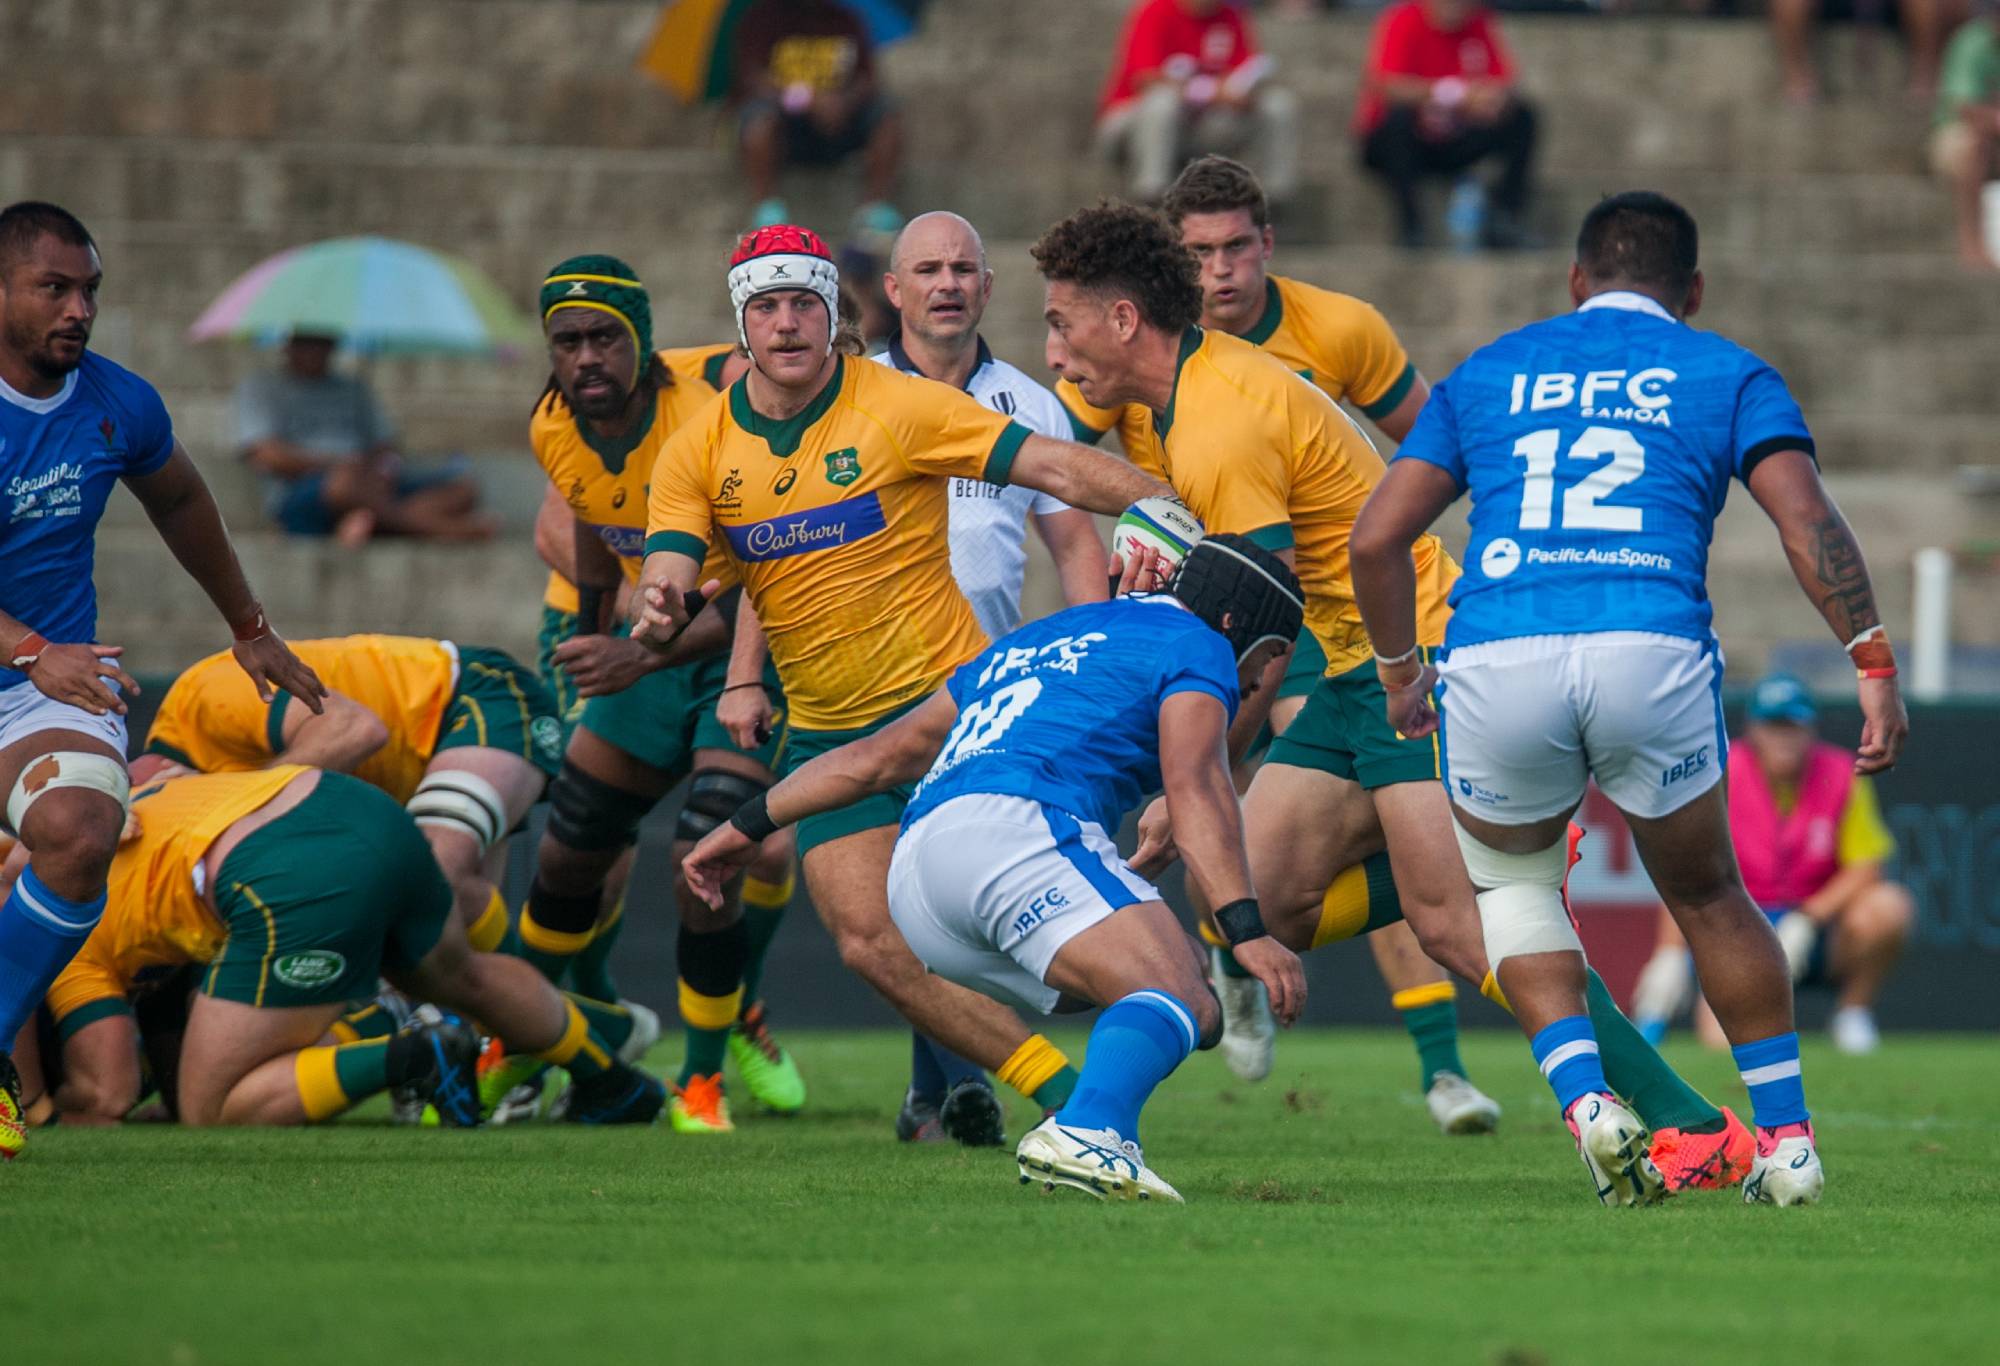 Australi A with the ball during the World Rugby Pacific Nations match between Australia A and Samoa at HFC Stadium on July 2, 2022 in Suva, Fiji. (Photo by Pita Simpson/Getty Images)